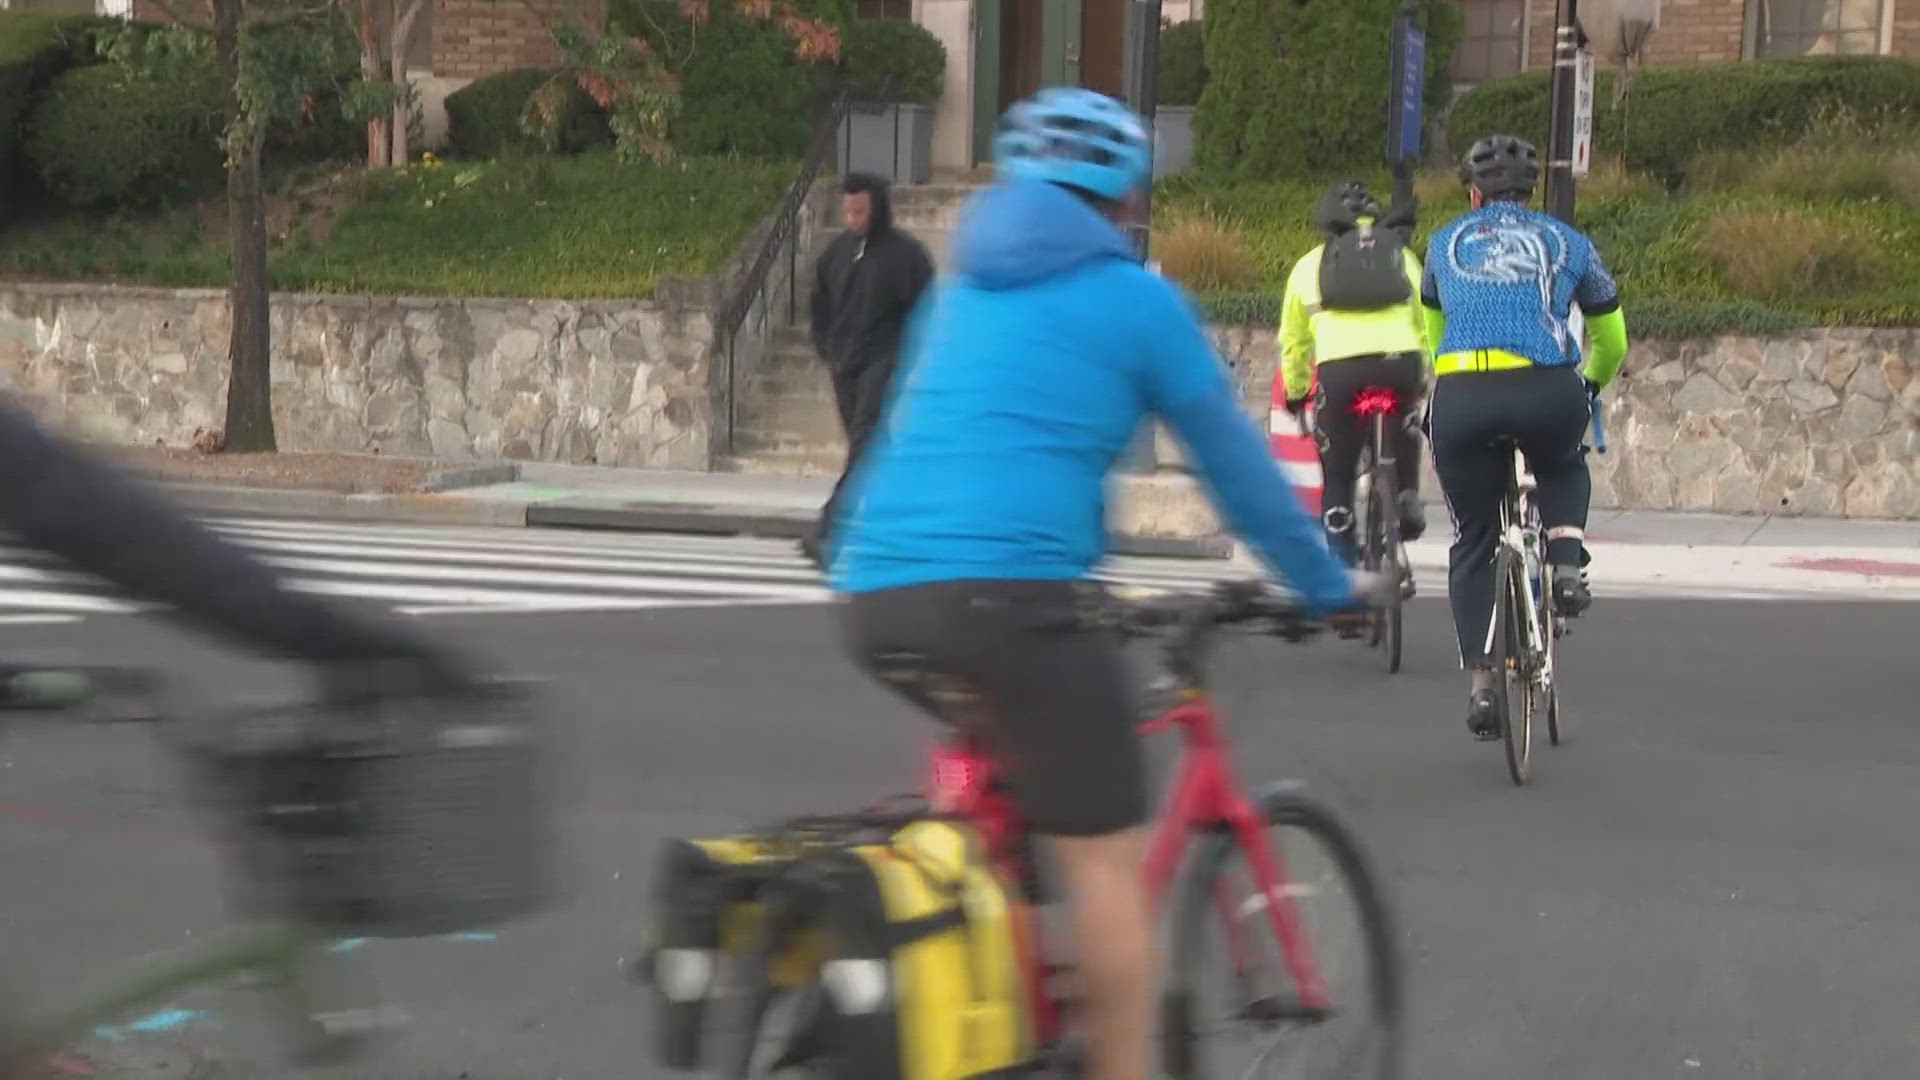 The project's inclusion of bike lanes was hotly debated in 2023 with bicycle safety advocates celebrating the additions and neighbors voicing opposition.